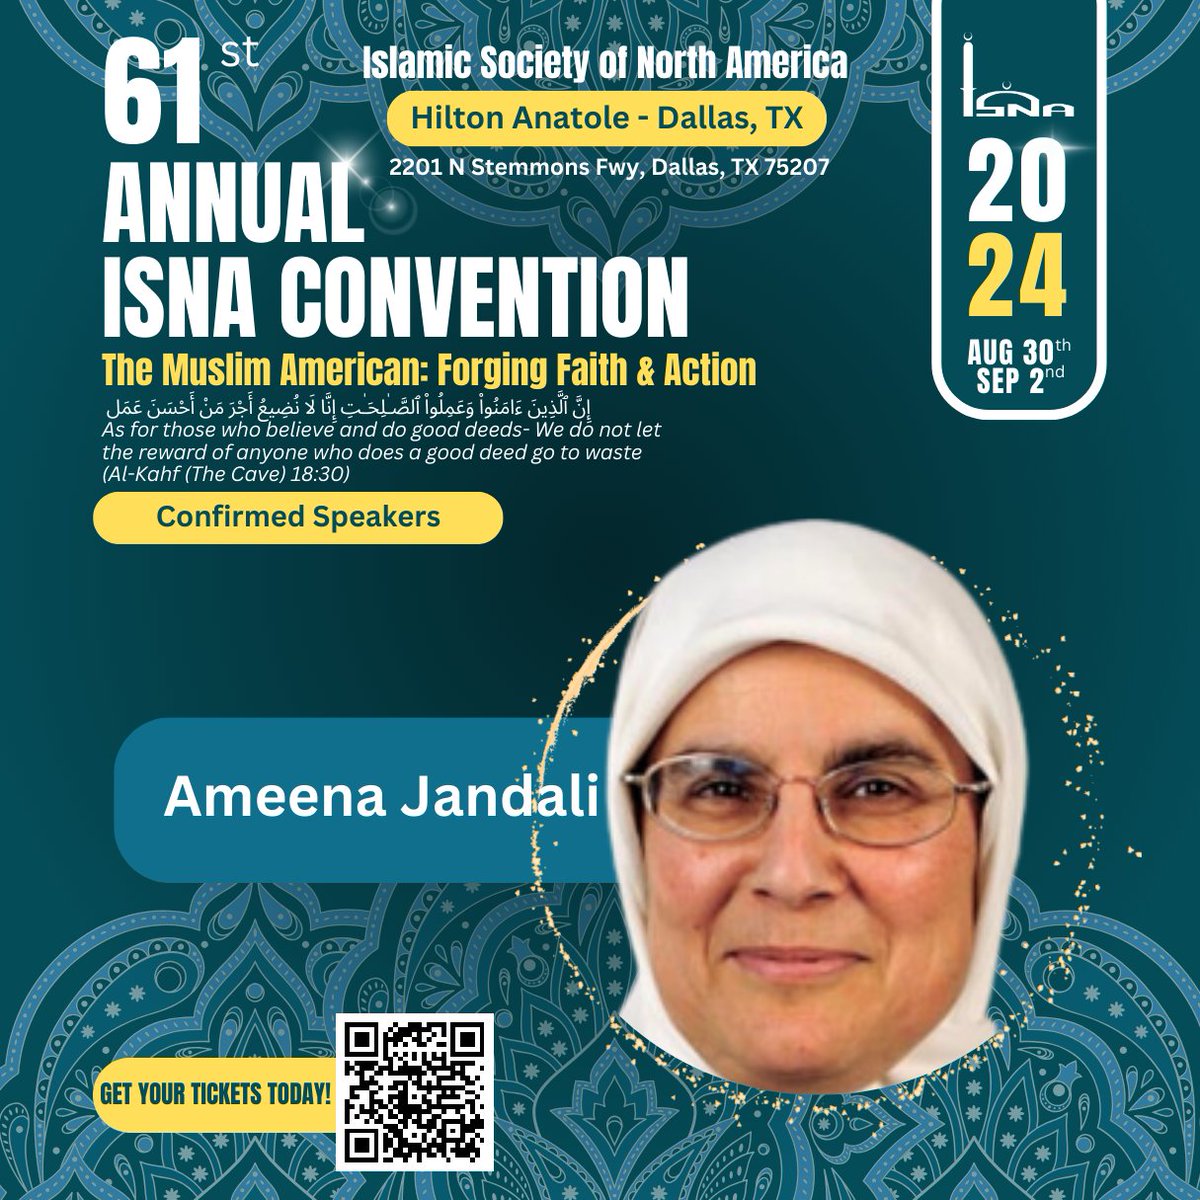 Ameena Jandali is a confirmed speaker for ISNA's 61st Annual Convention in Dallas, TX this year!

Get your tickets at isna.net/convention/

#ISNA61 #ISNAconvention #dallas